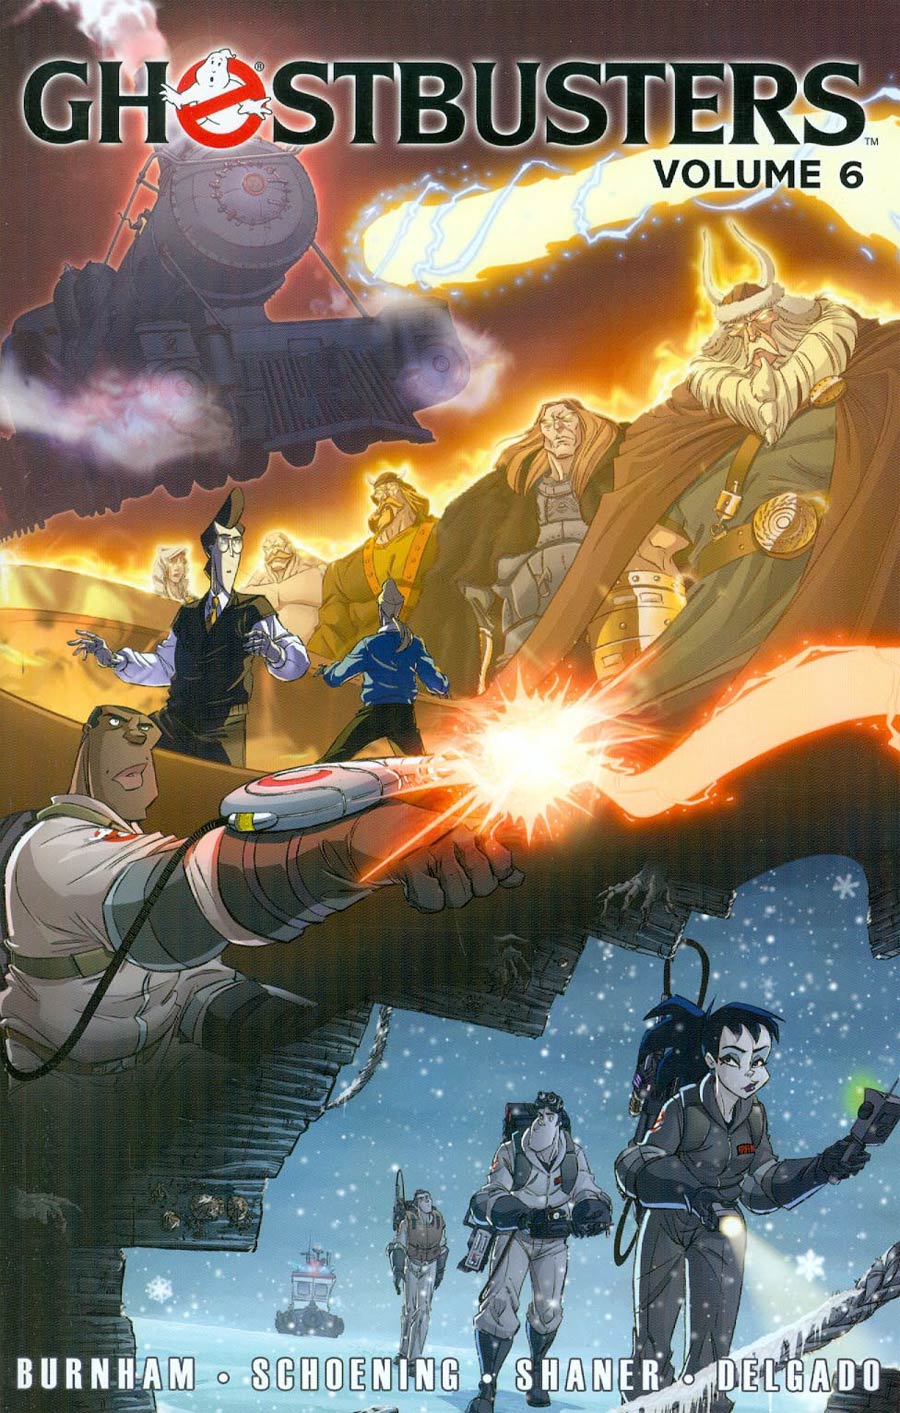 Ghostbusters Vol 6 Trains Brains And Ghostly Remains TP